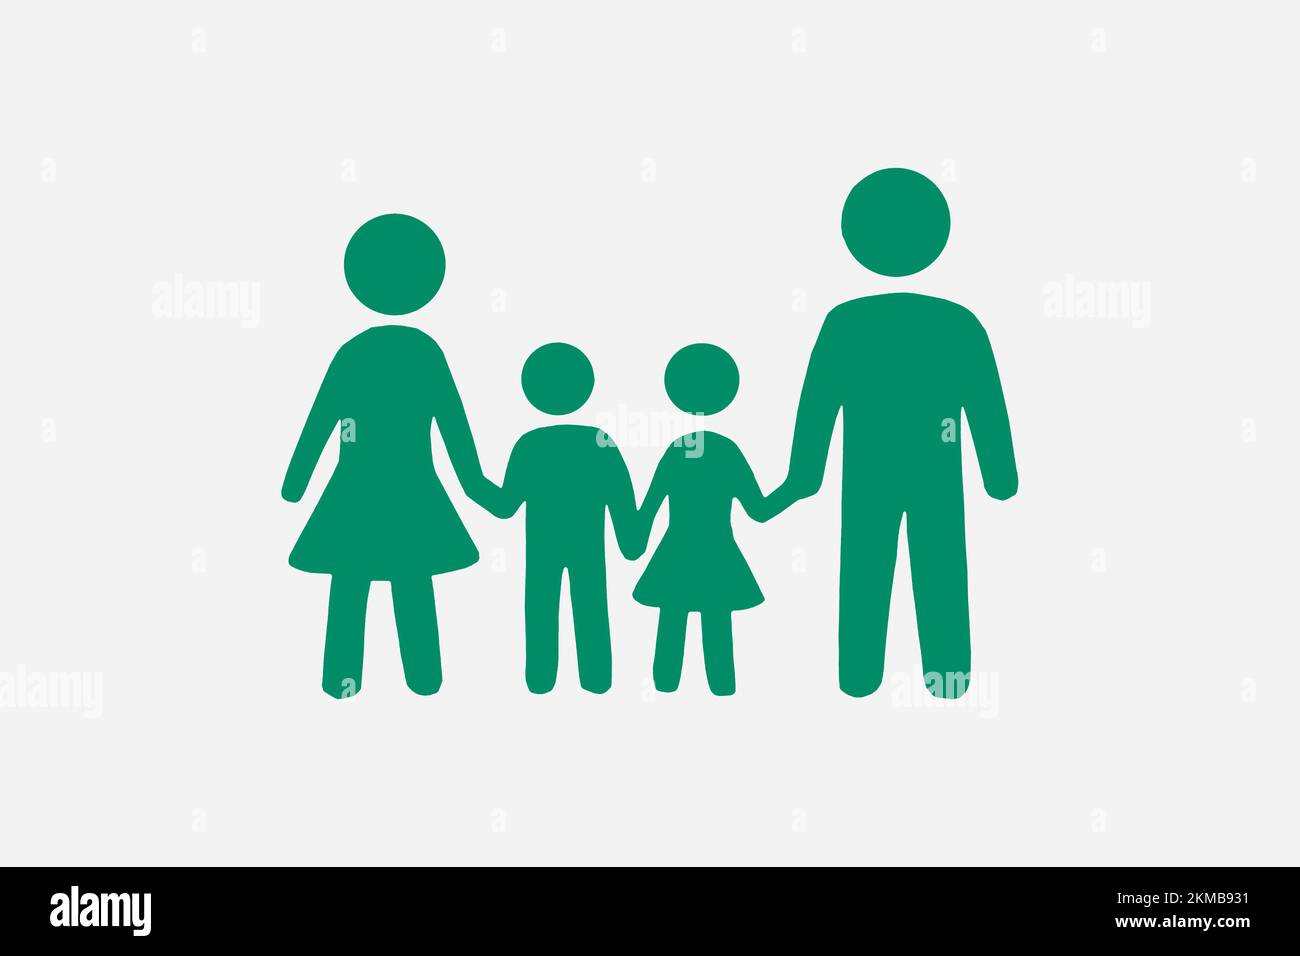 Green silhouette of a mother, father, and two children Green silhouette of a mother, father, and two children Stock Photo